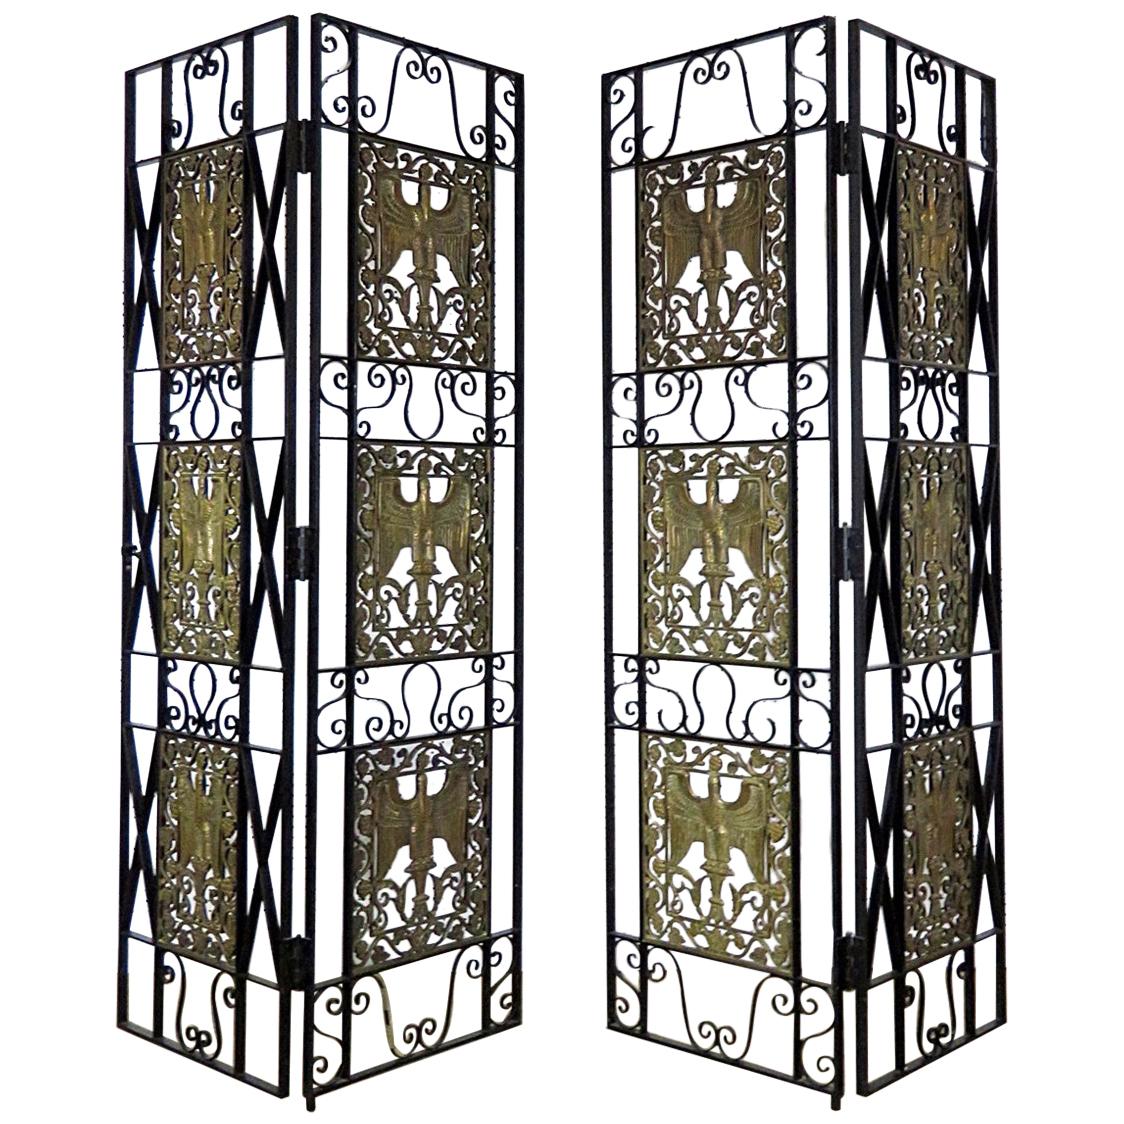 Pair of High Art Deco Wrought Iron and Bronze Stork Room Divider Panels C1920